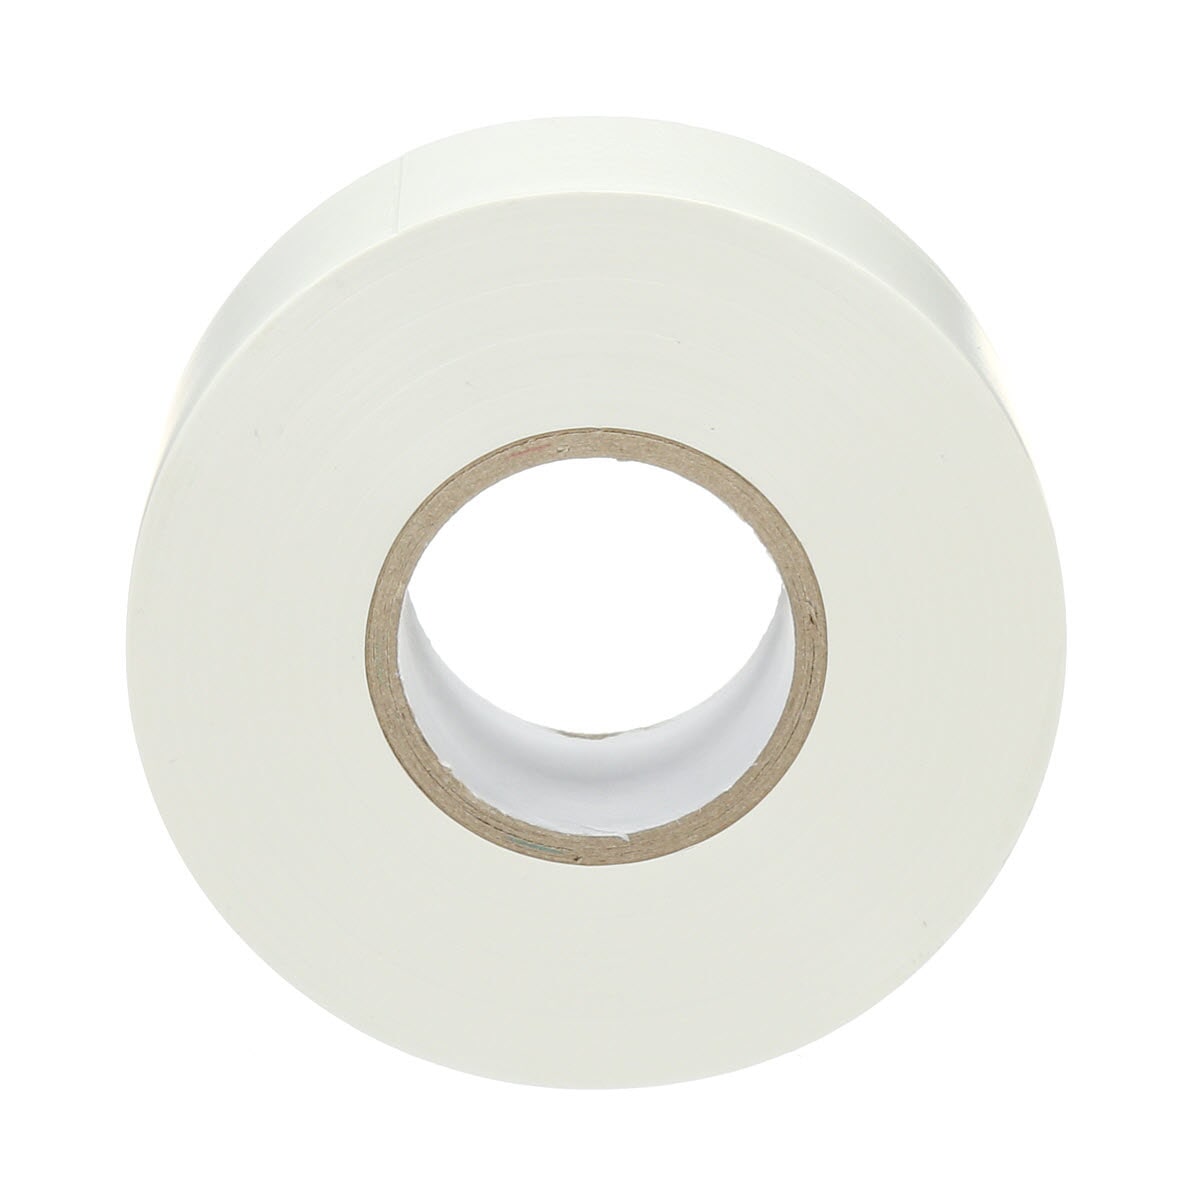 Venture Tape 7100043848 Rubber Adhesive Selfwound Tape, 36 yd L x 1-1/2 in W x 6 mil THK, PVC